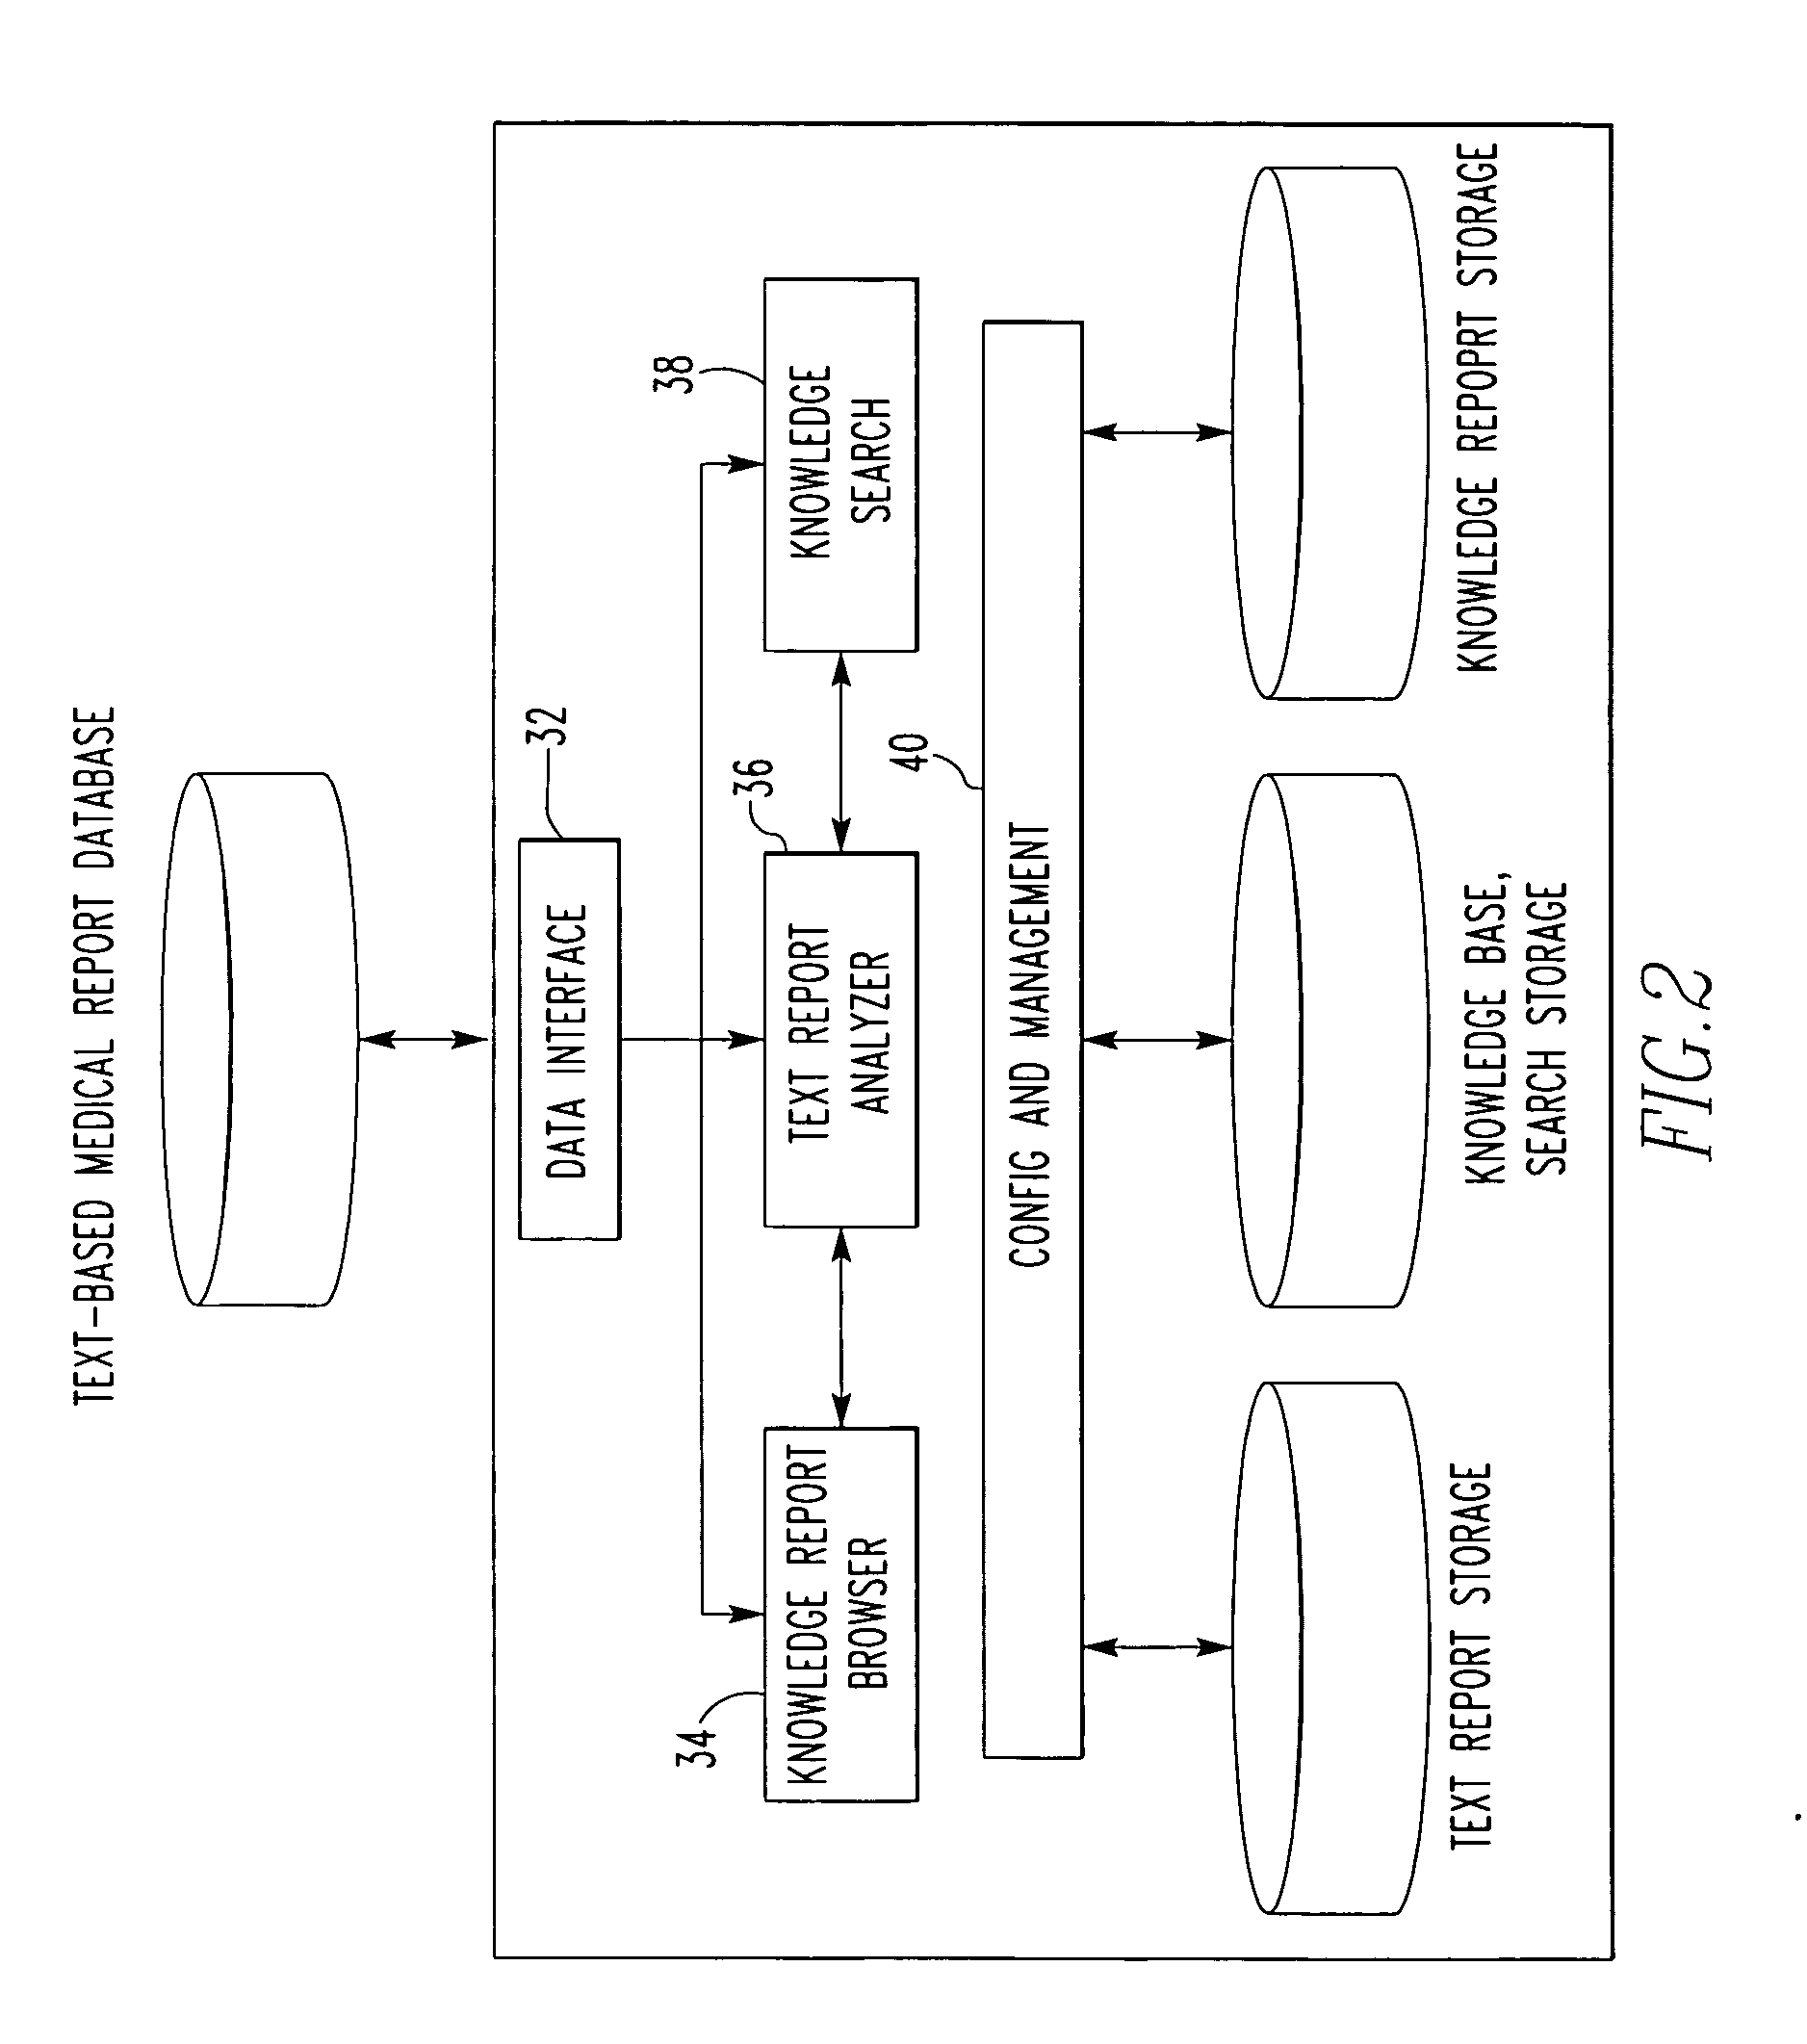 Method and system for presenting and processing multiple text-based medical reports